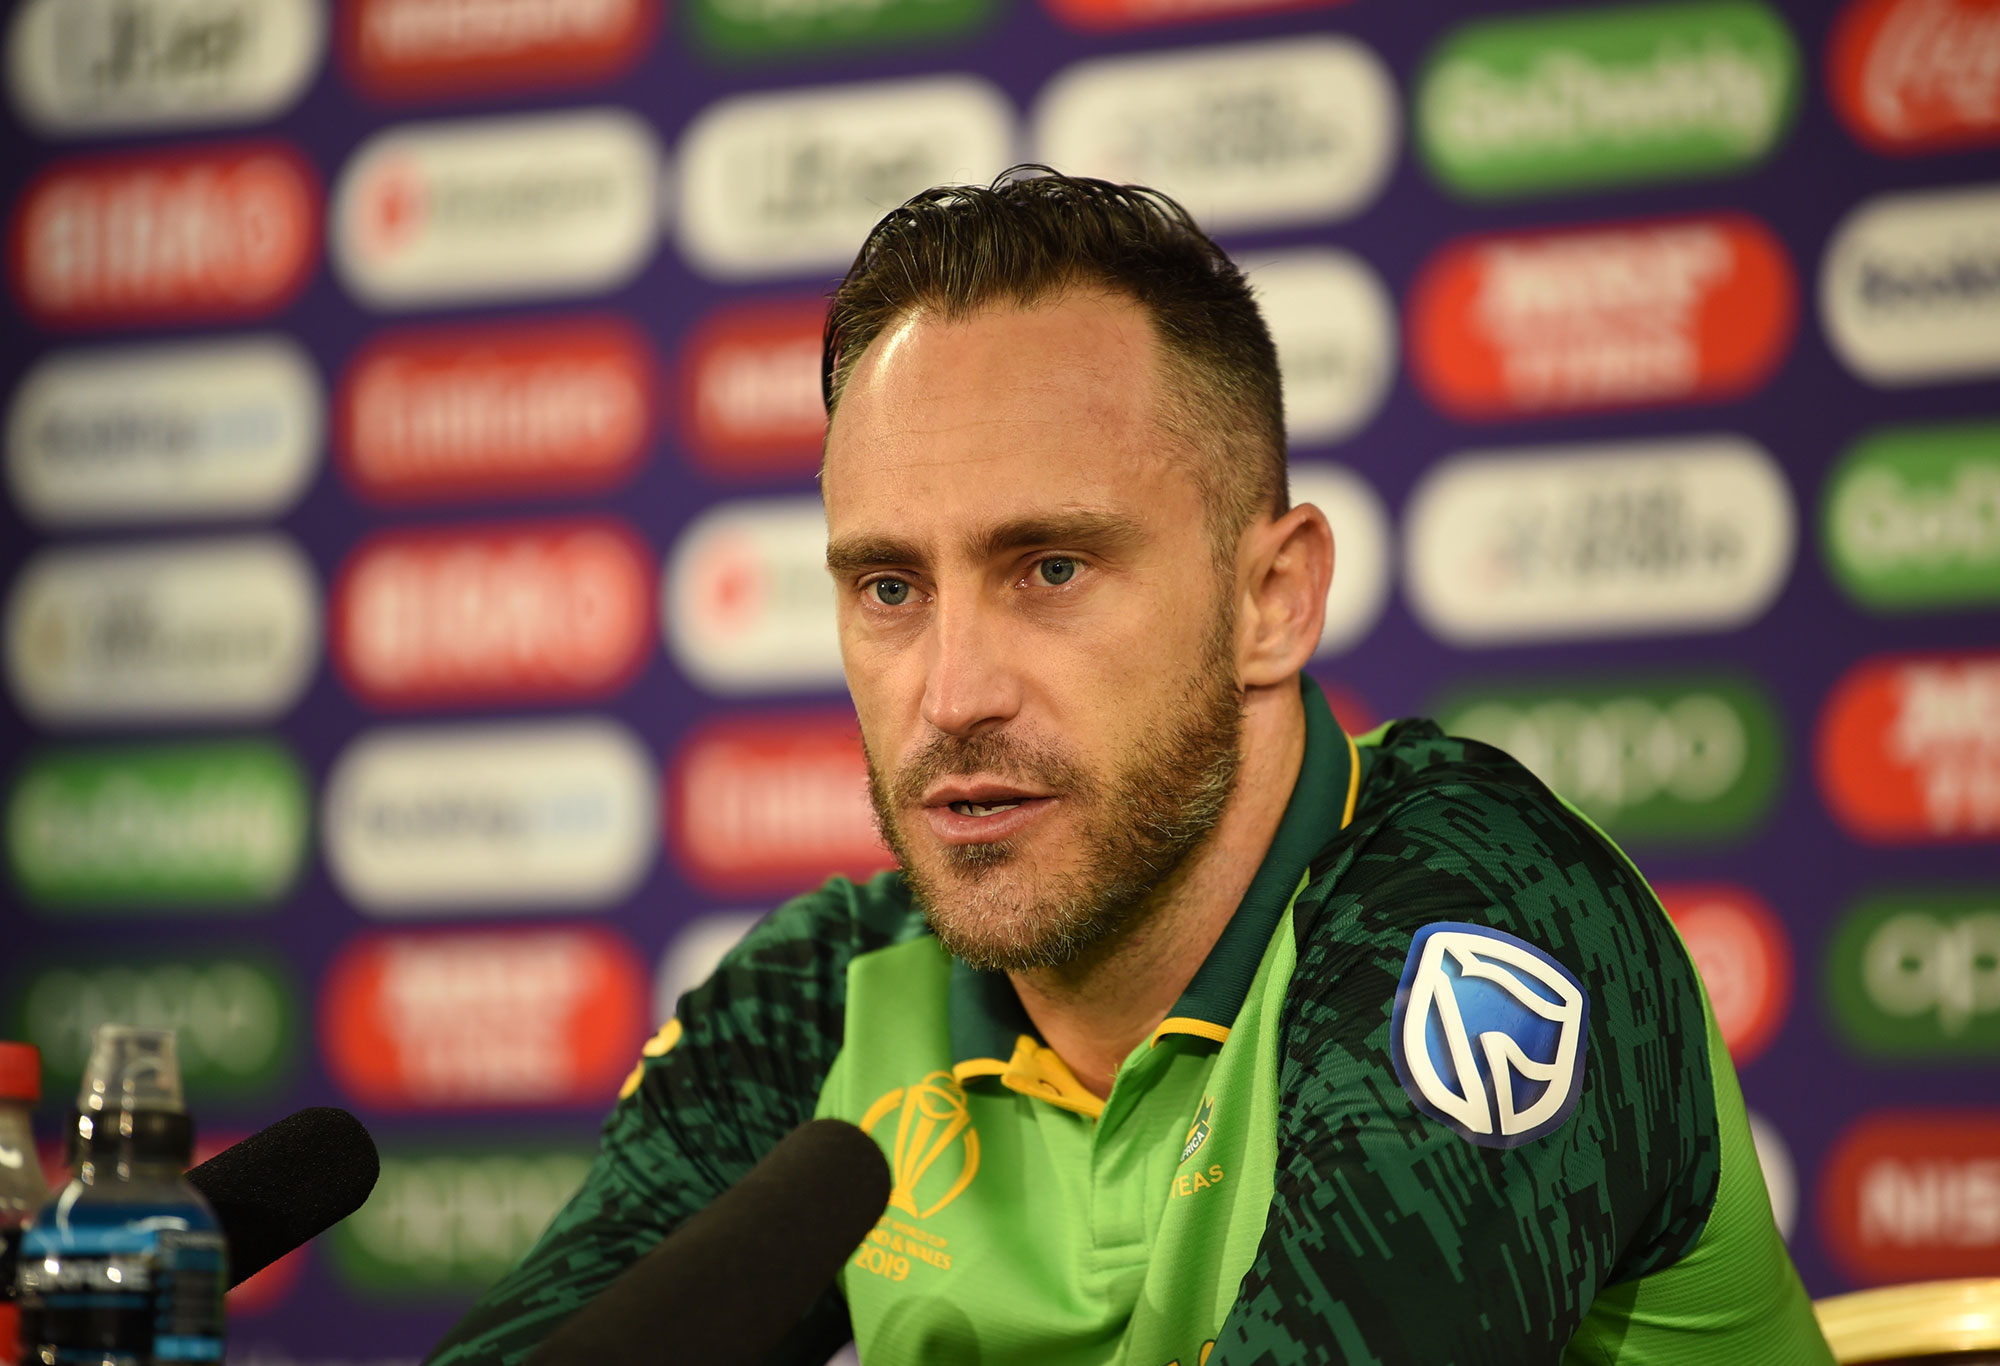 Faf du Plessis talks post match of Australia vs South Africa during 2019 ICC World Cup